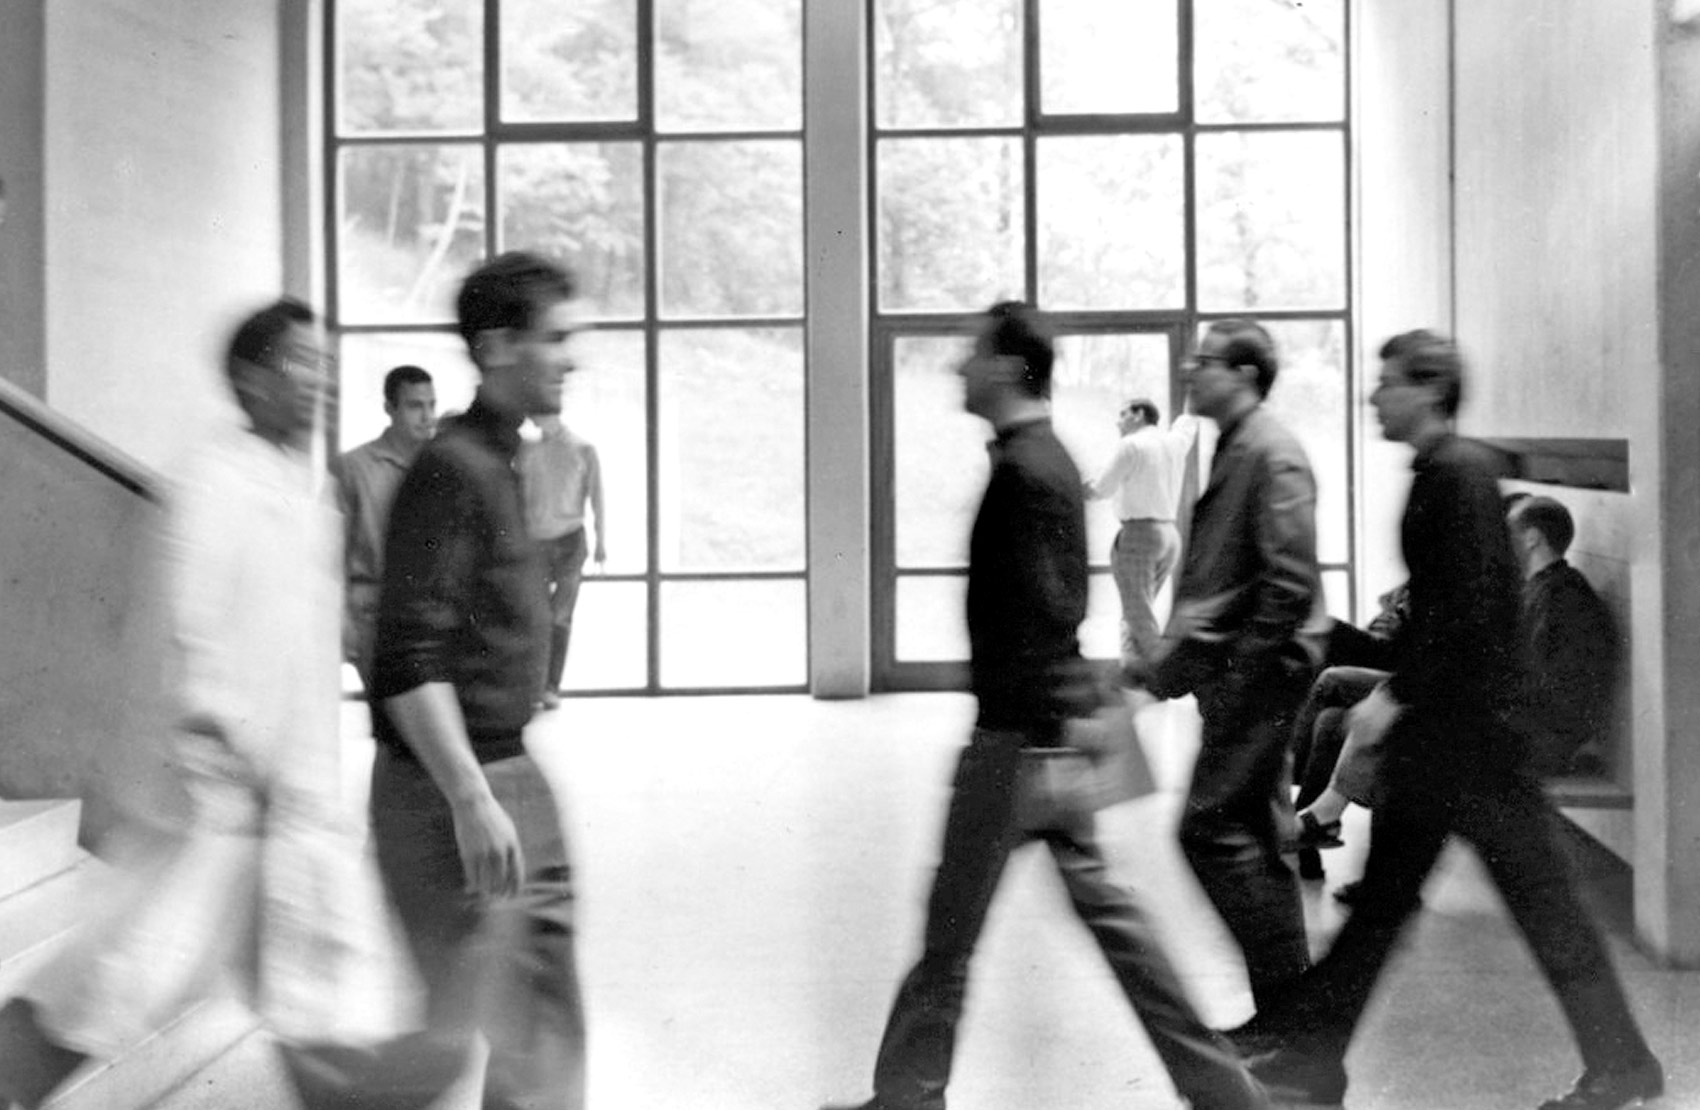 View of the entrance area with passing students in the foreground, 1960